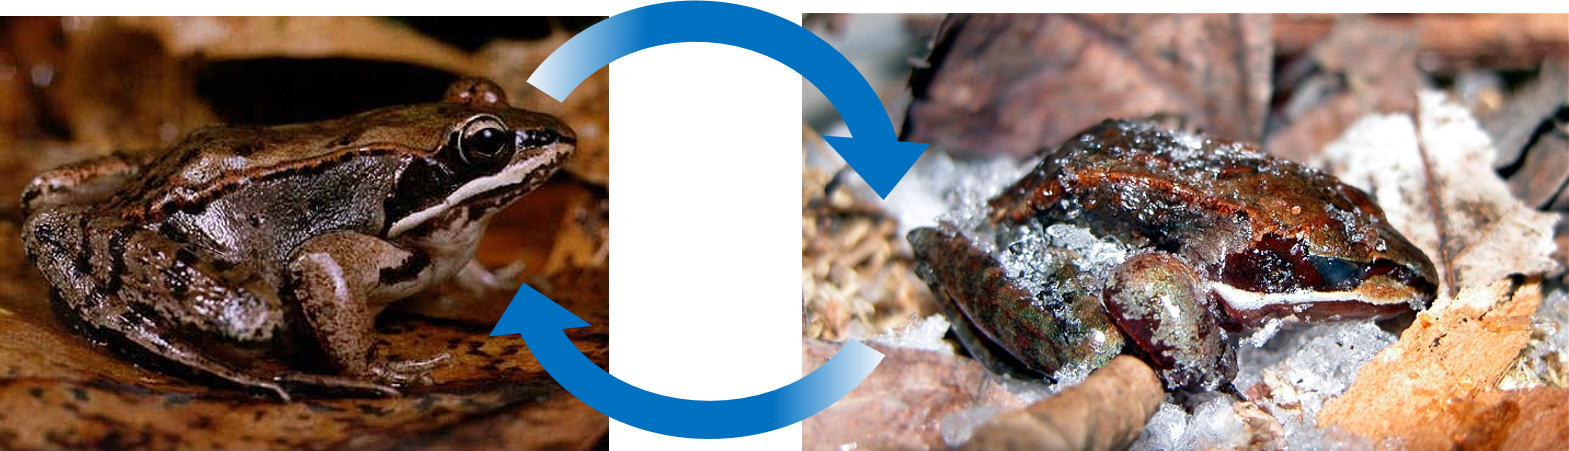 The arctic wood frog Rana sylvatica can survive after months of being frozen